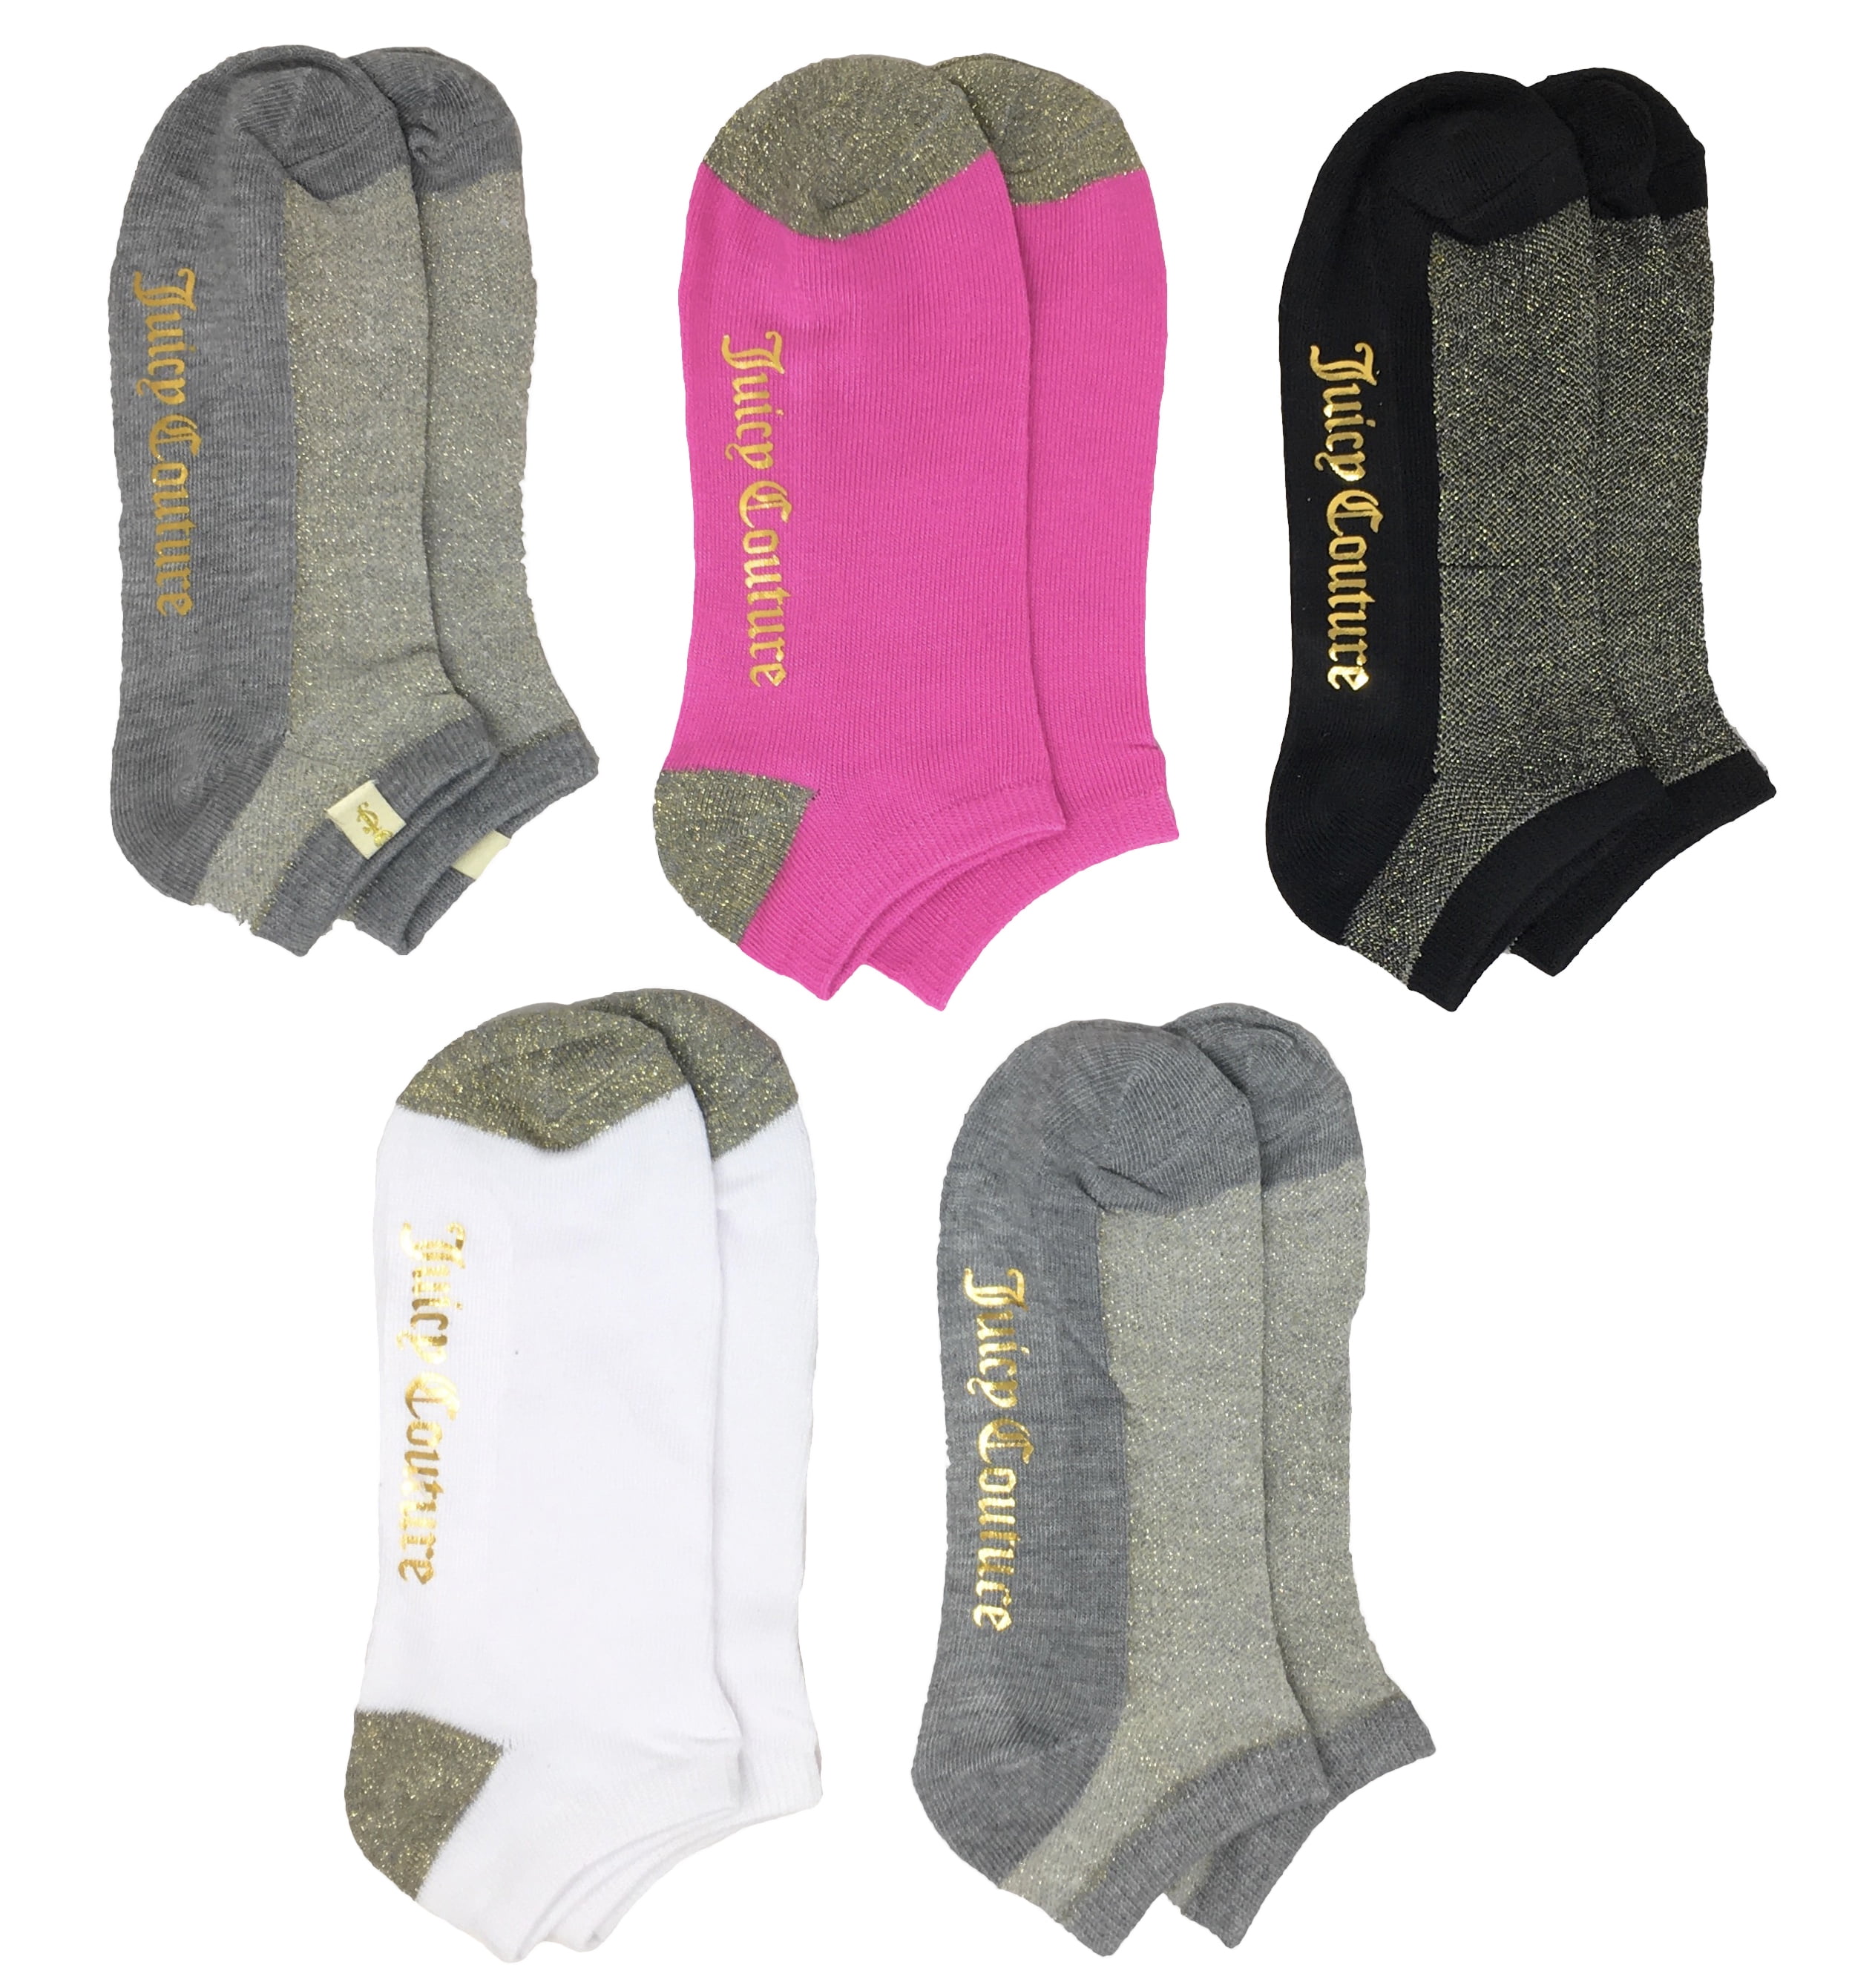 Juicy Couture Womens 5-Pack No Show Socks, Shoe Size 4-10, Group D ...